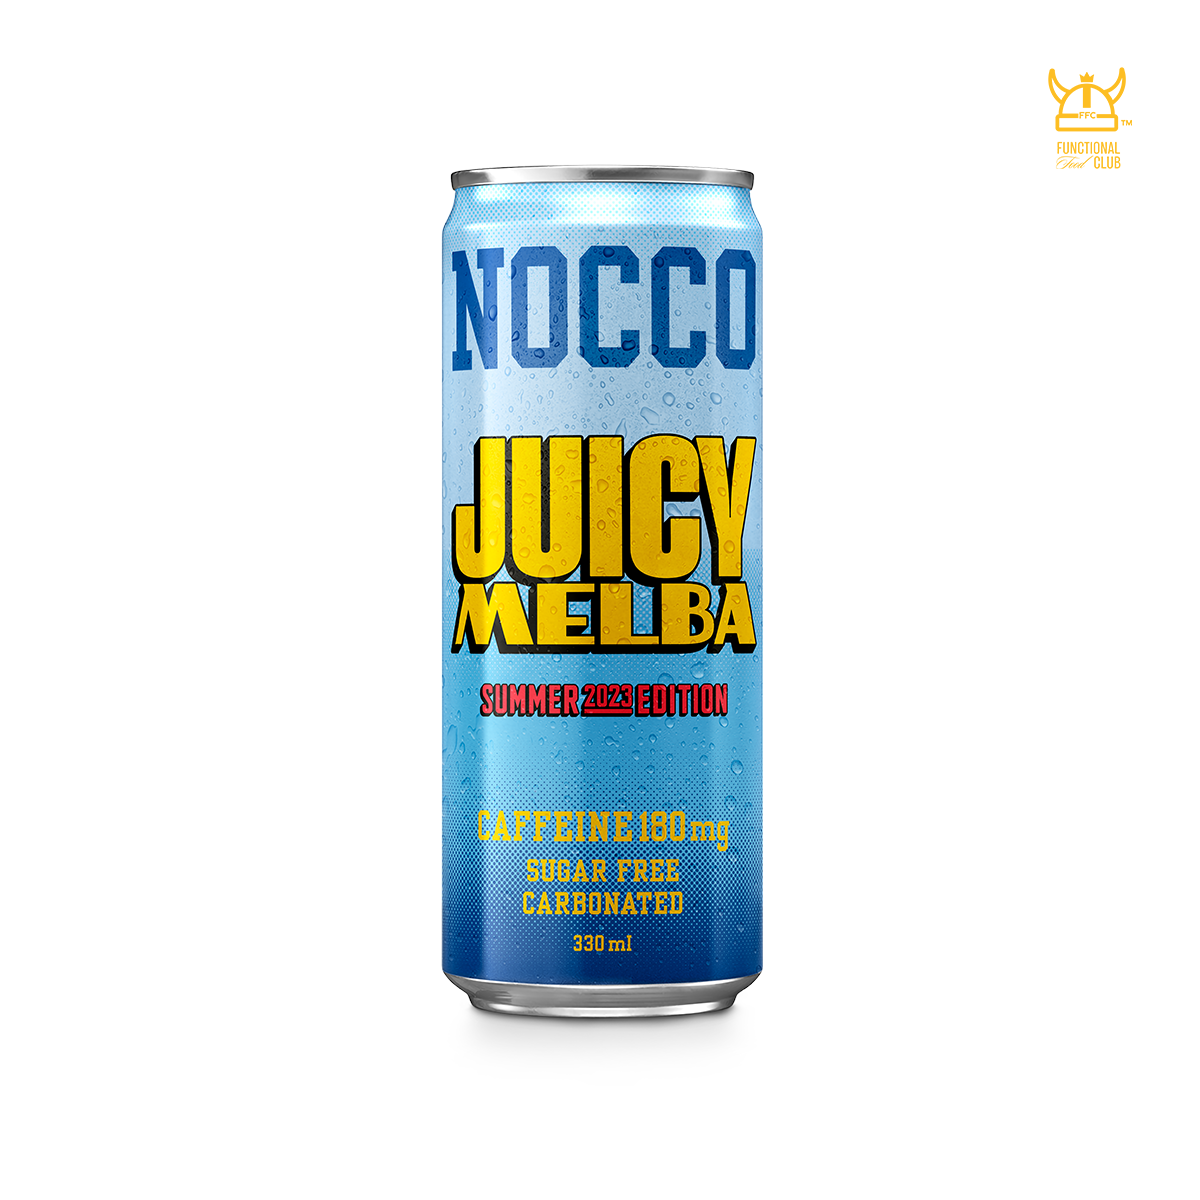 NOCCO BCAA Multi-vitamins Performance Drink - JUICY MELBA (Caffeinated) 1 Can